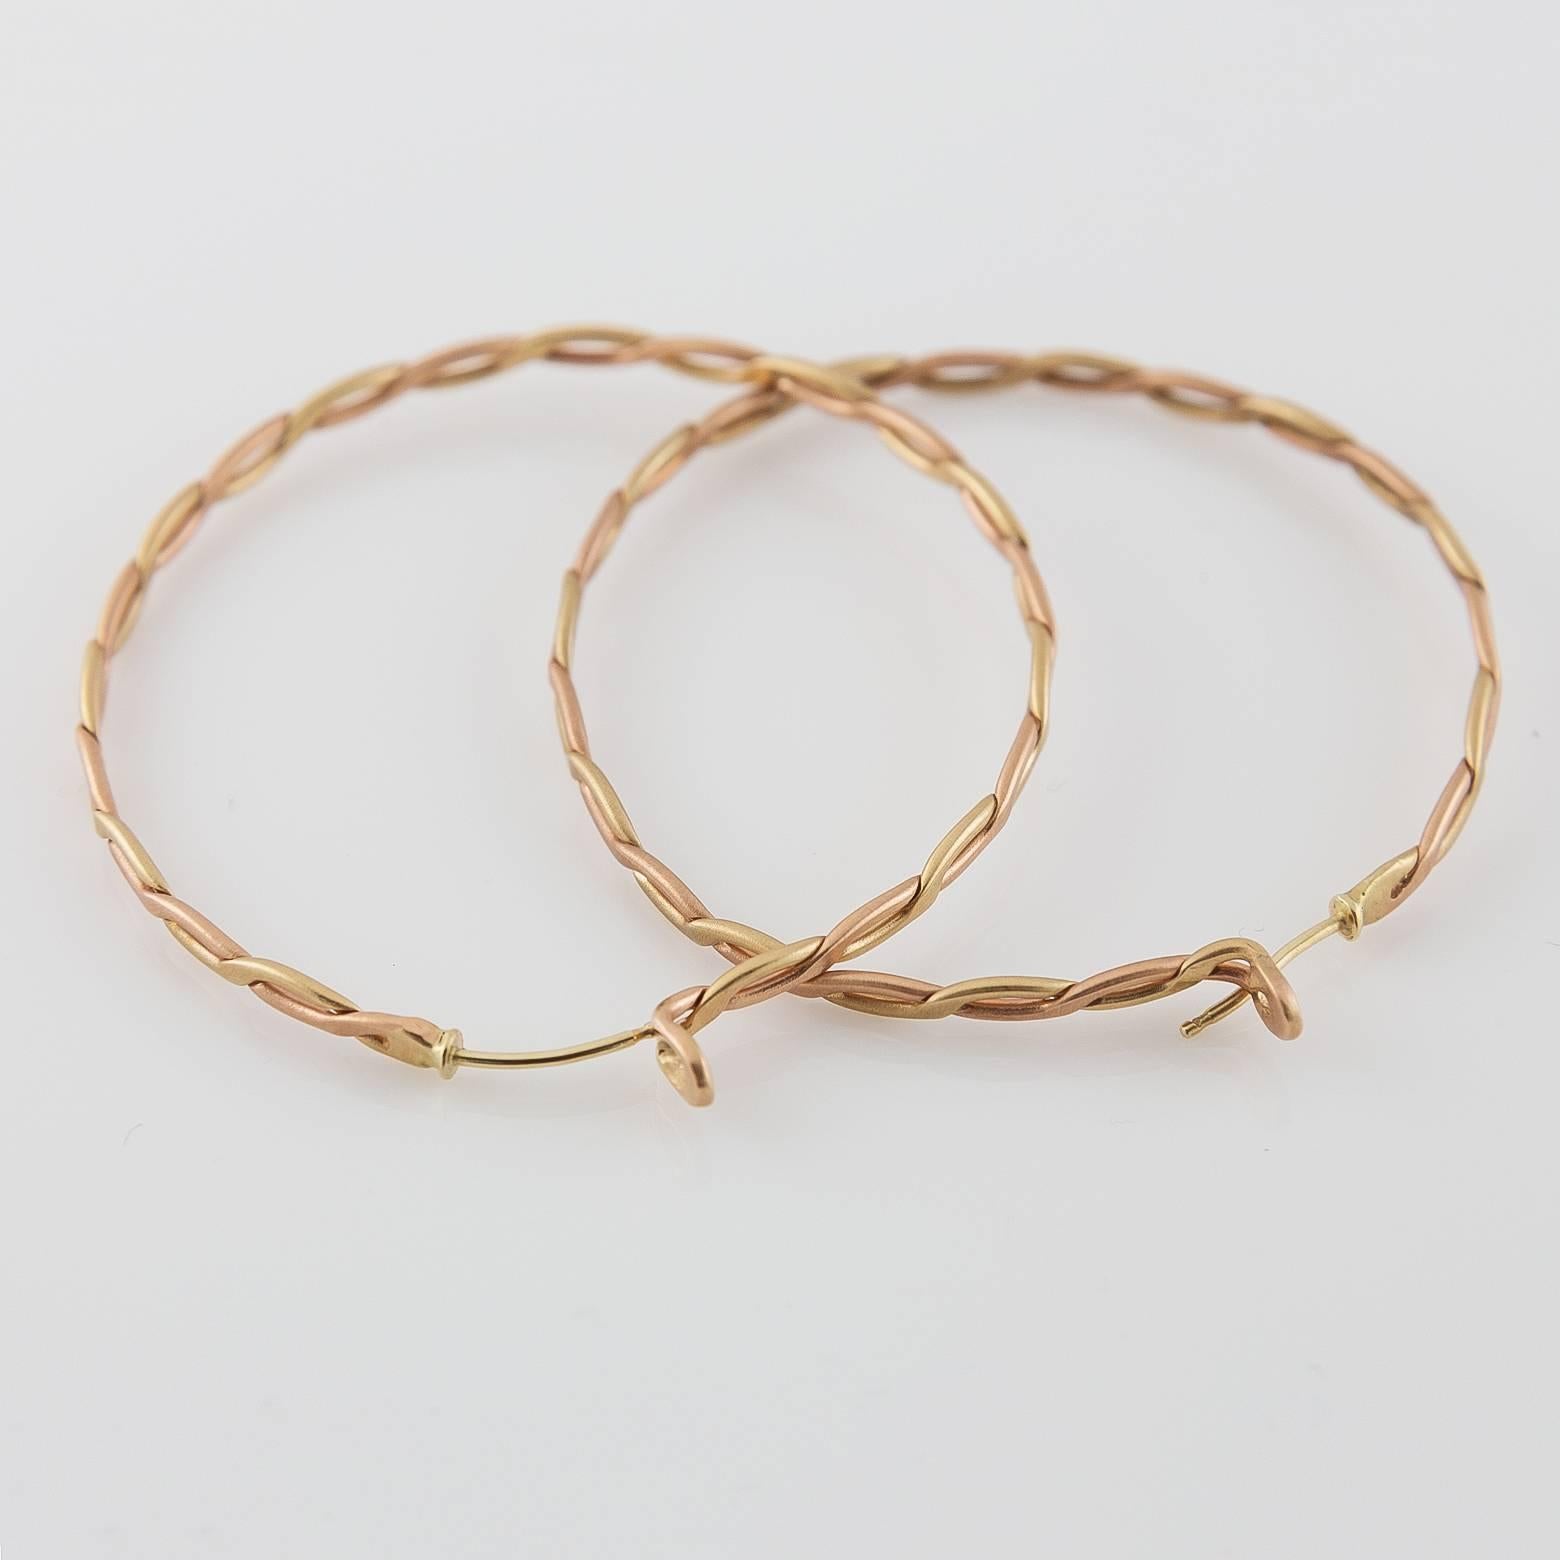 Spiral Woven Braided 14 Karat Rose Gold Hoop Earrings In New Condition For Sale In Berkeley, CA